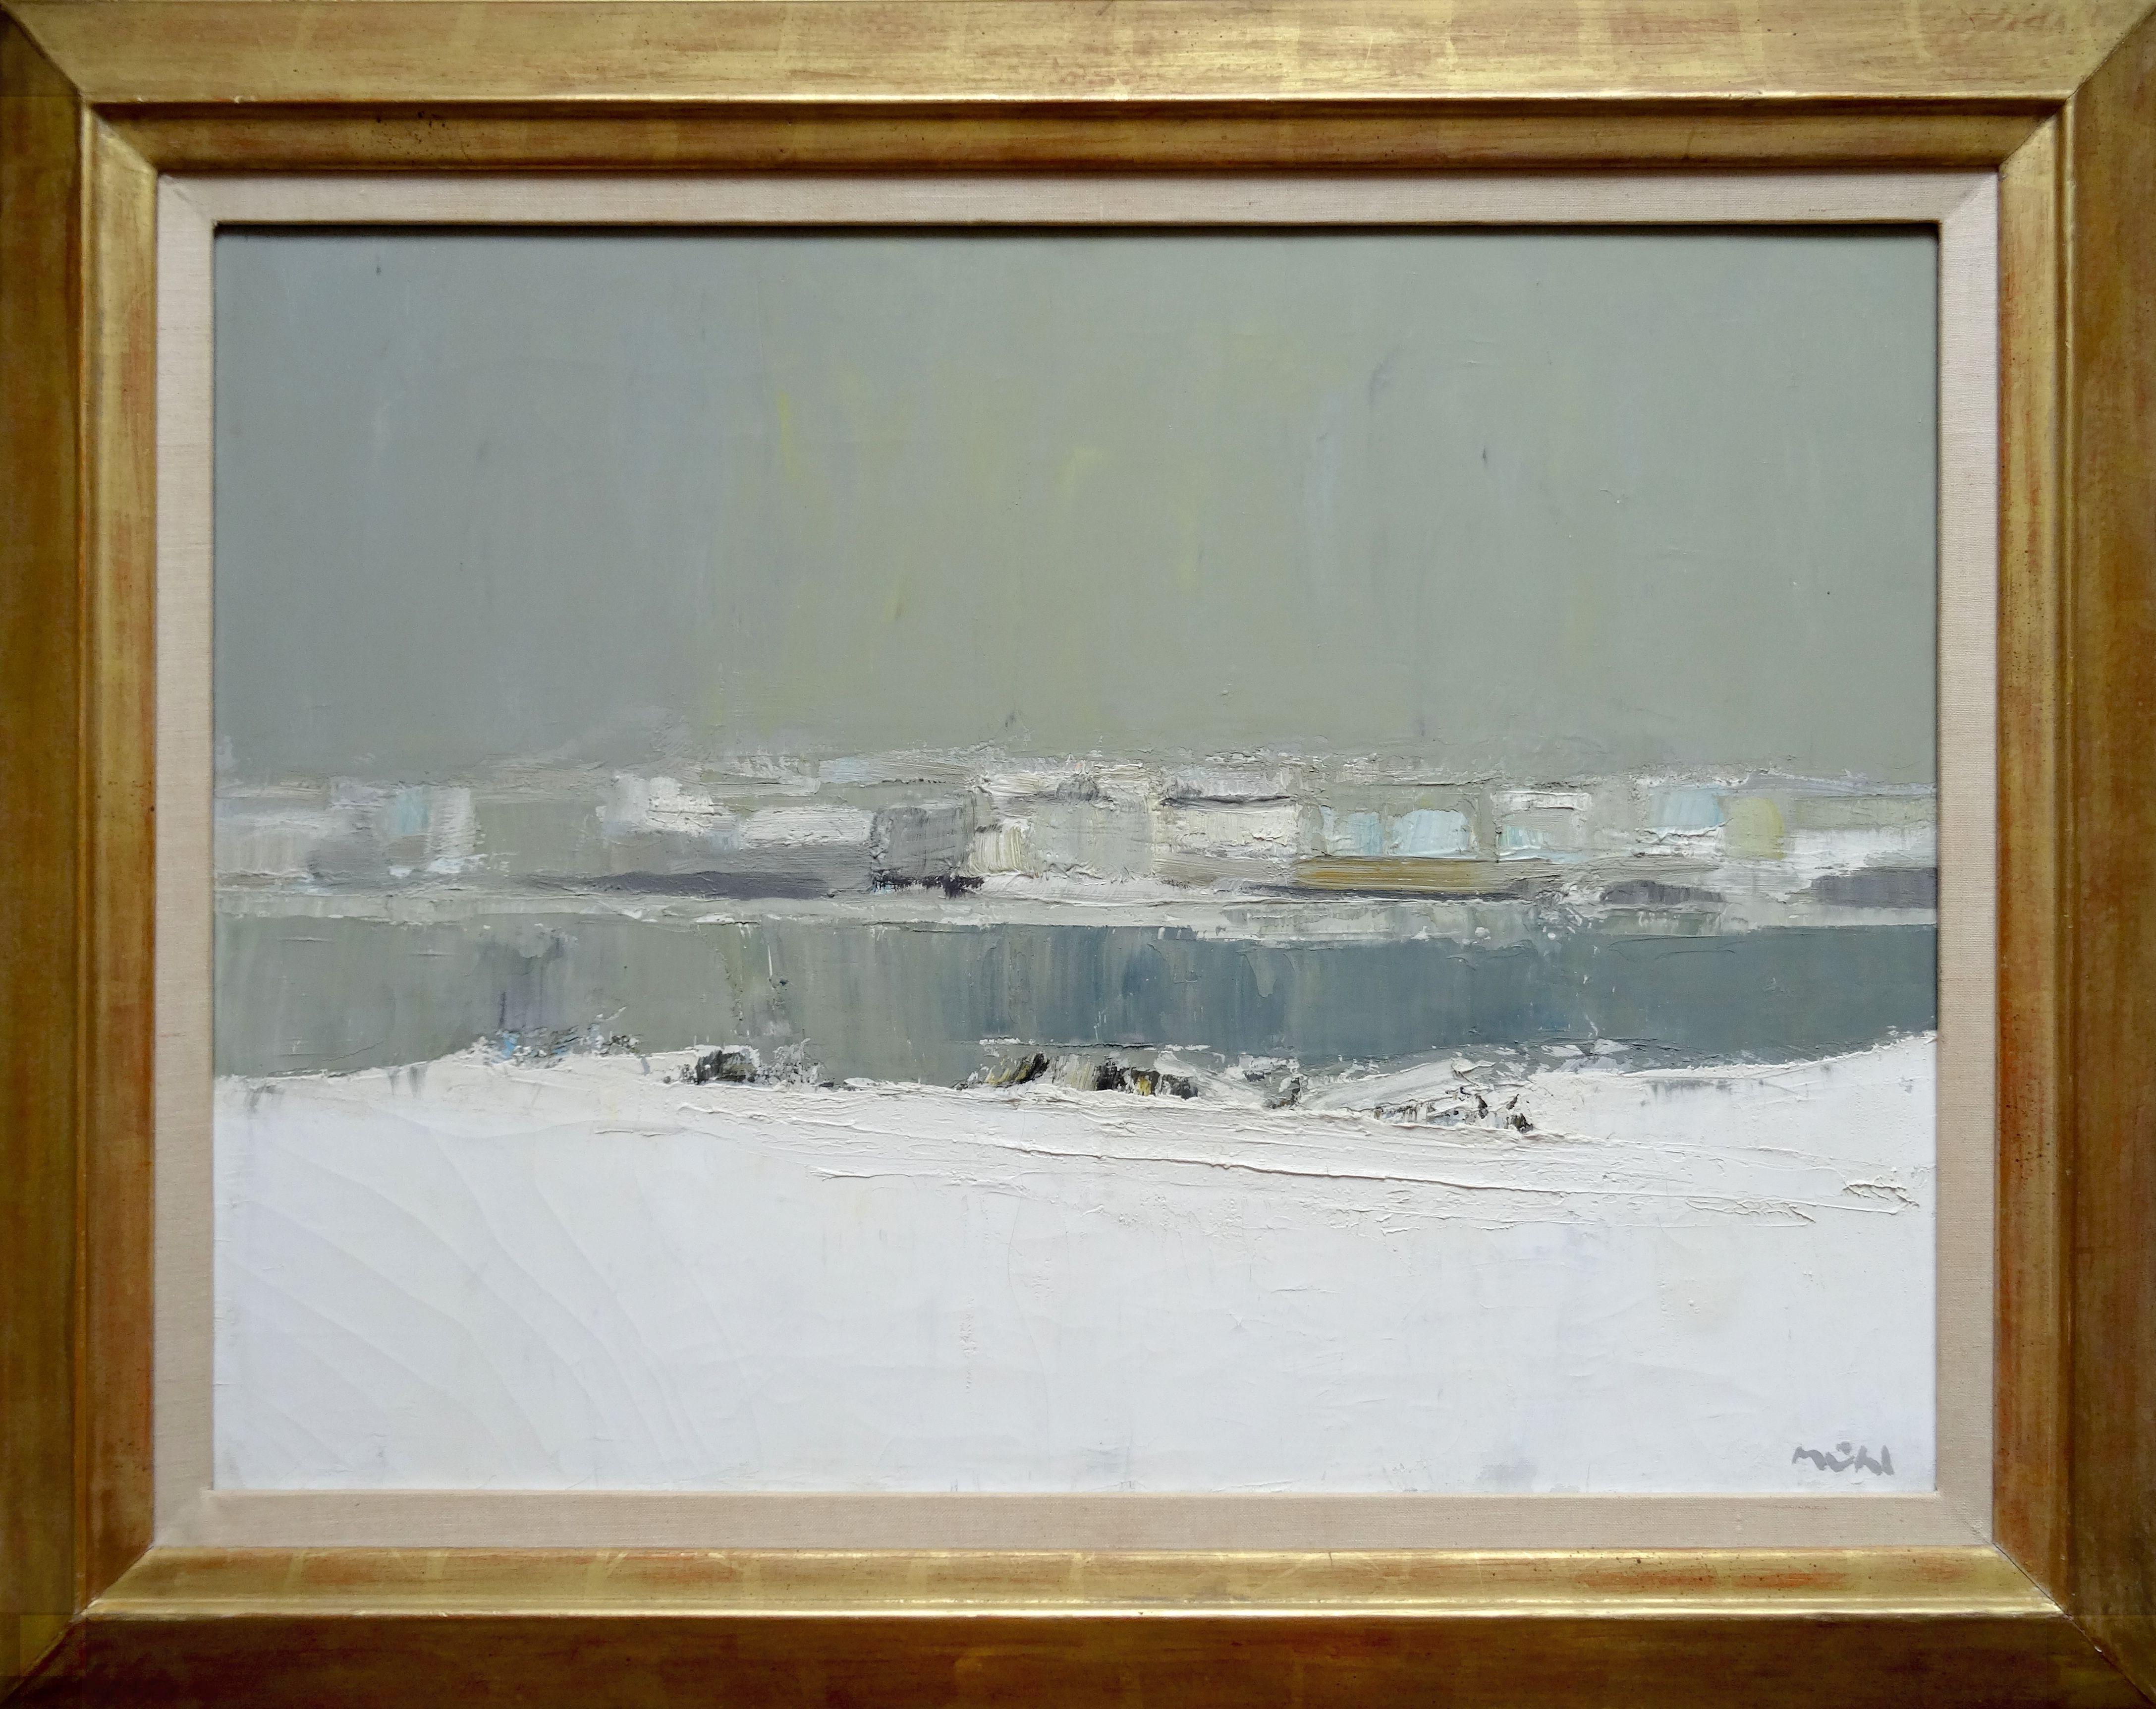 Paris. Banks of the Seine. 1961, oil on canvas, 60x81 cm - Painting by Roger Mühl